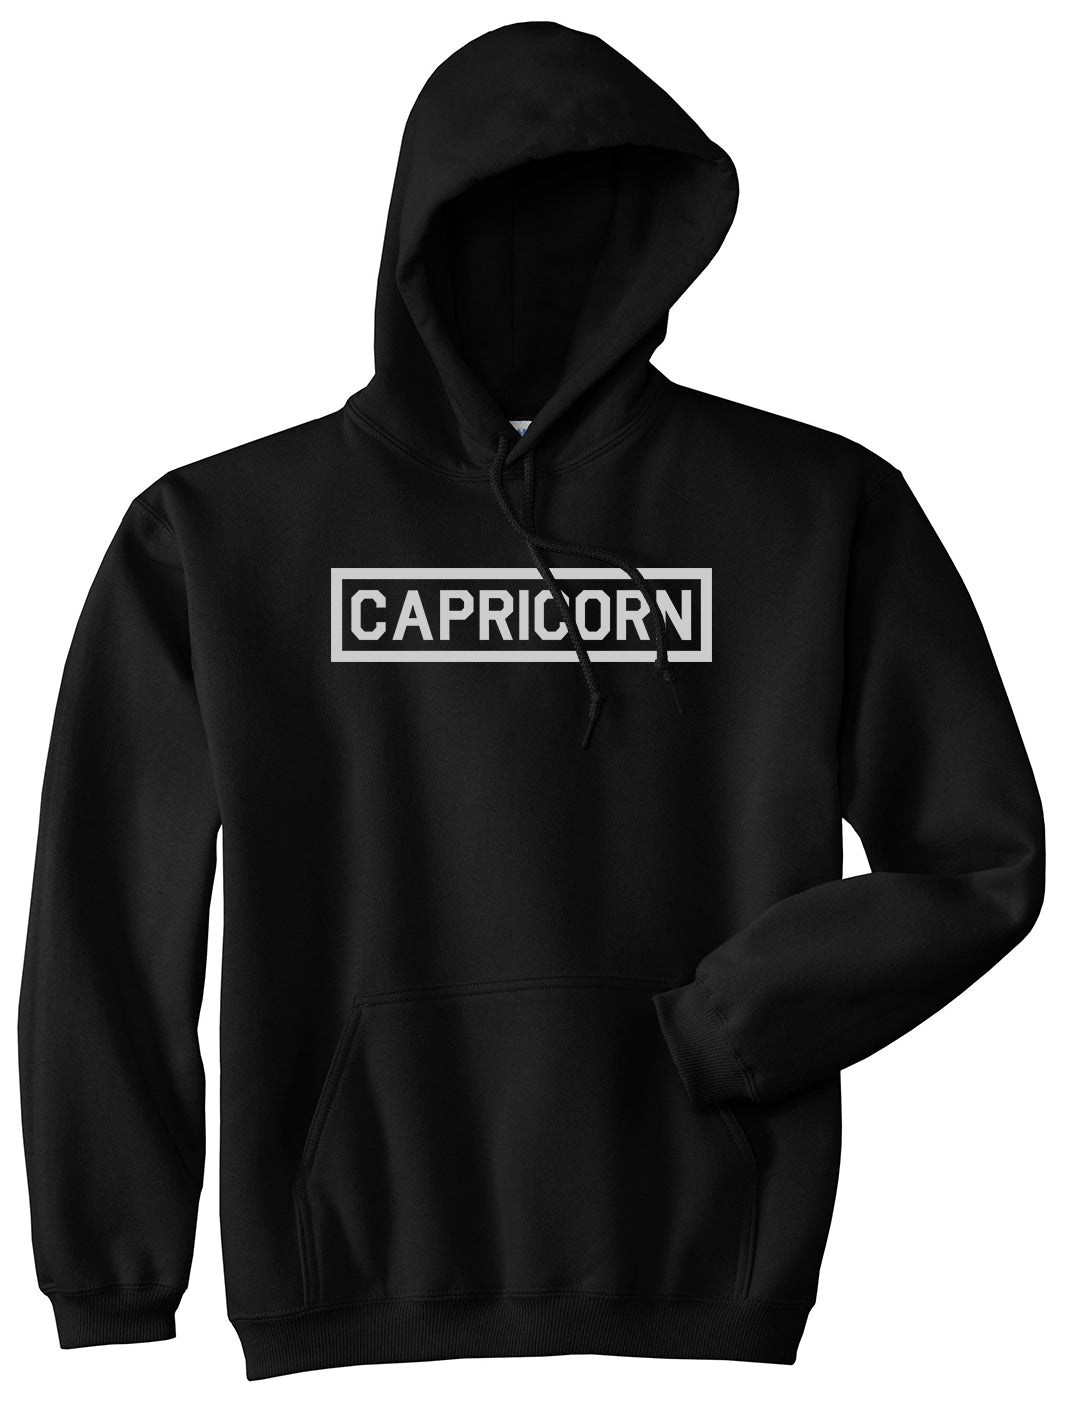 Capricorn Horoscope Sign Mens Black Pullover Hoodie by KINGS OF NY